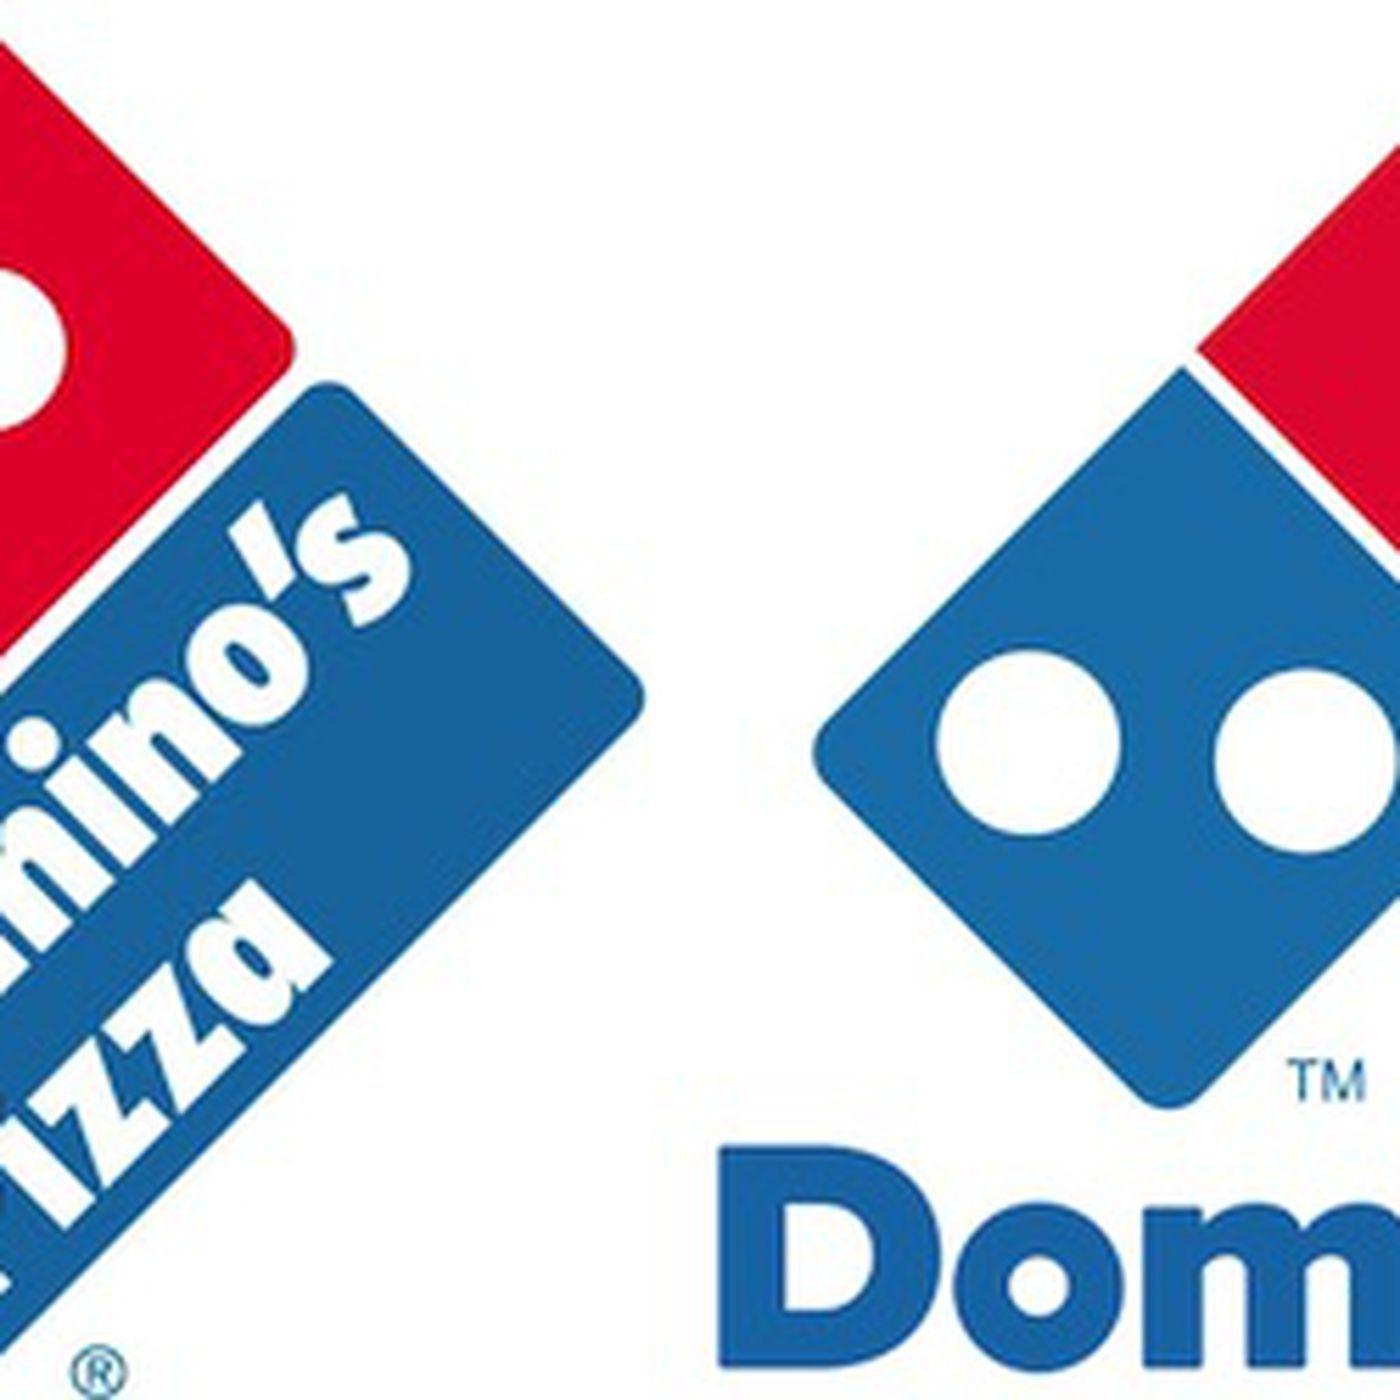 Old Domino's Pizza Logo - Domino's Removes 'Pizza' From Its New Logo - Eater